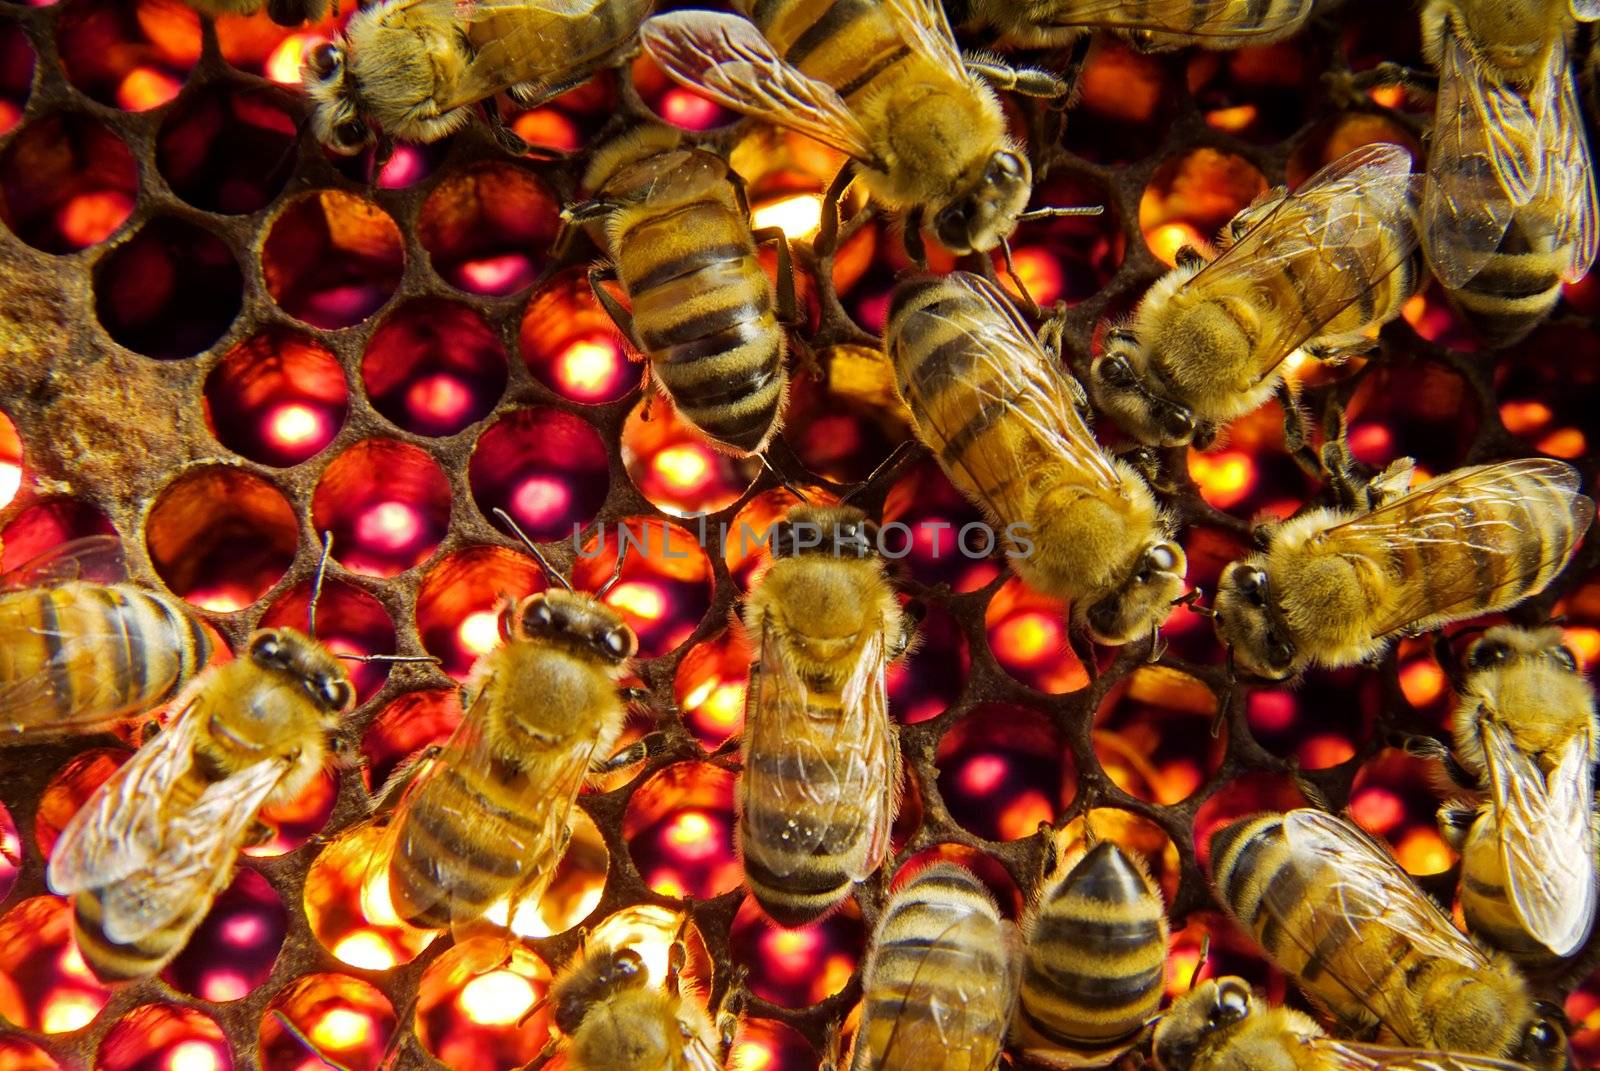 Bees inside a beehive 